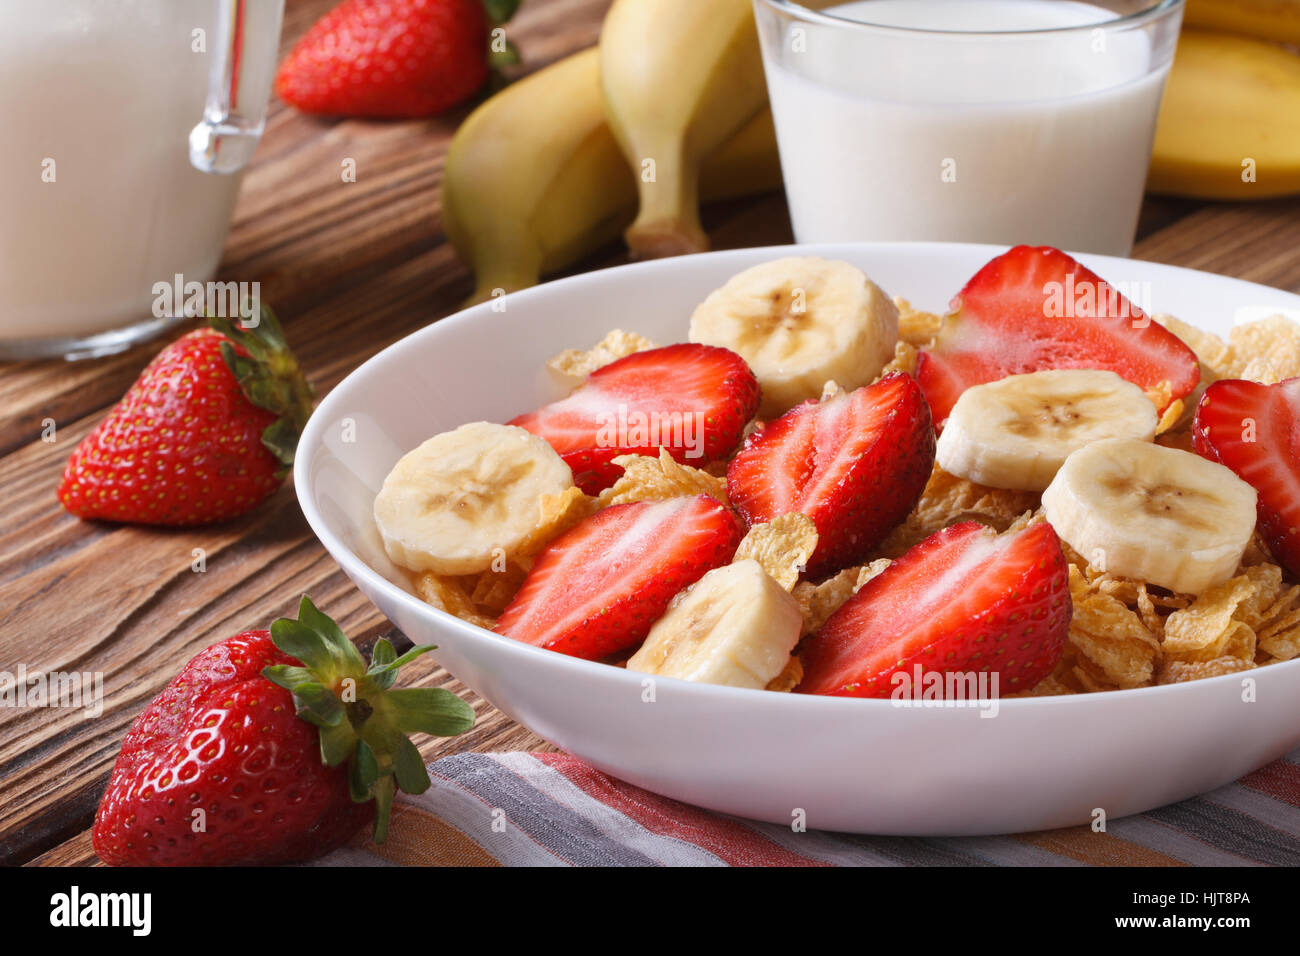 Muesli with fresh strawberries and a banana on the table and milk in a jug. horizontal Stock Photo